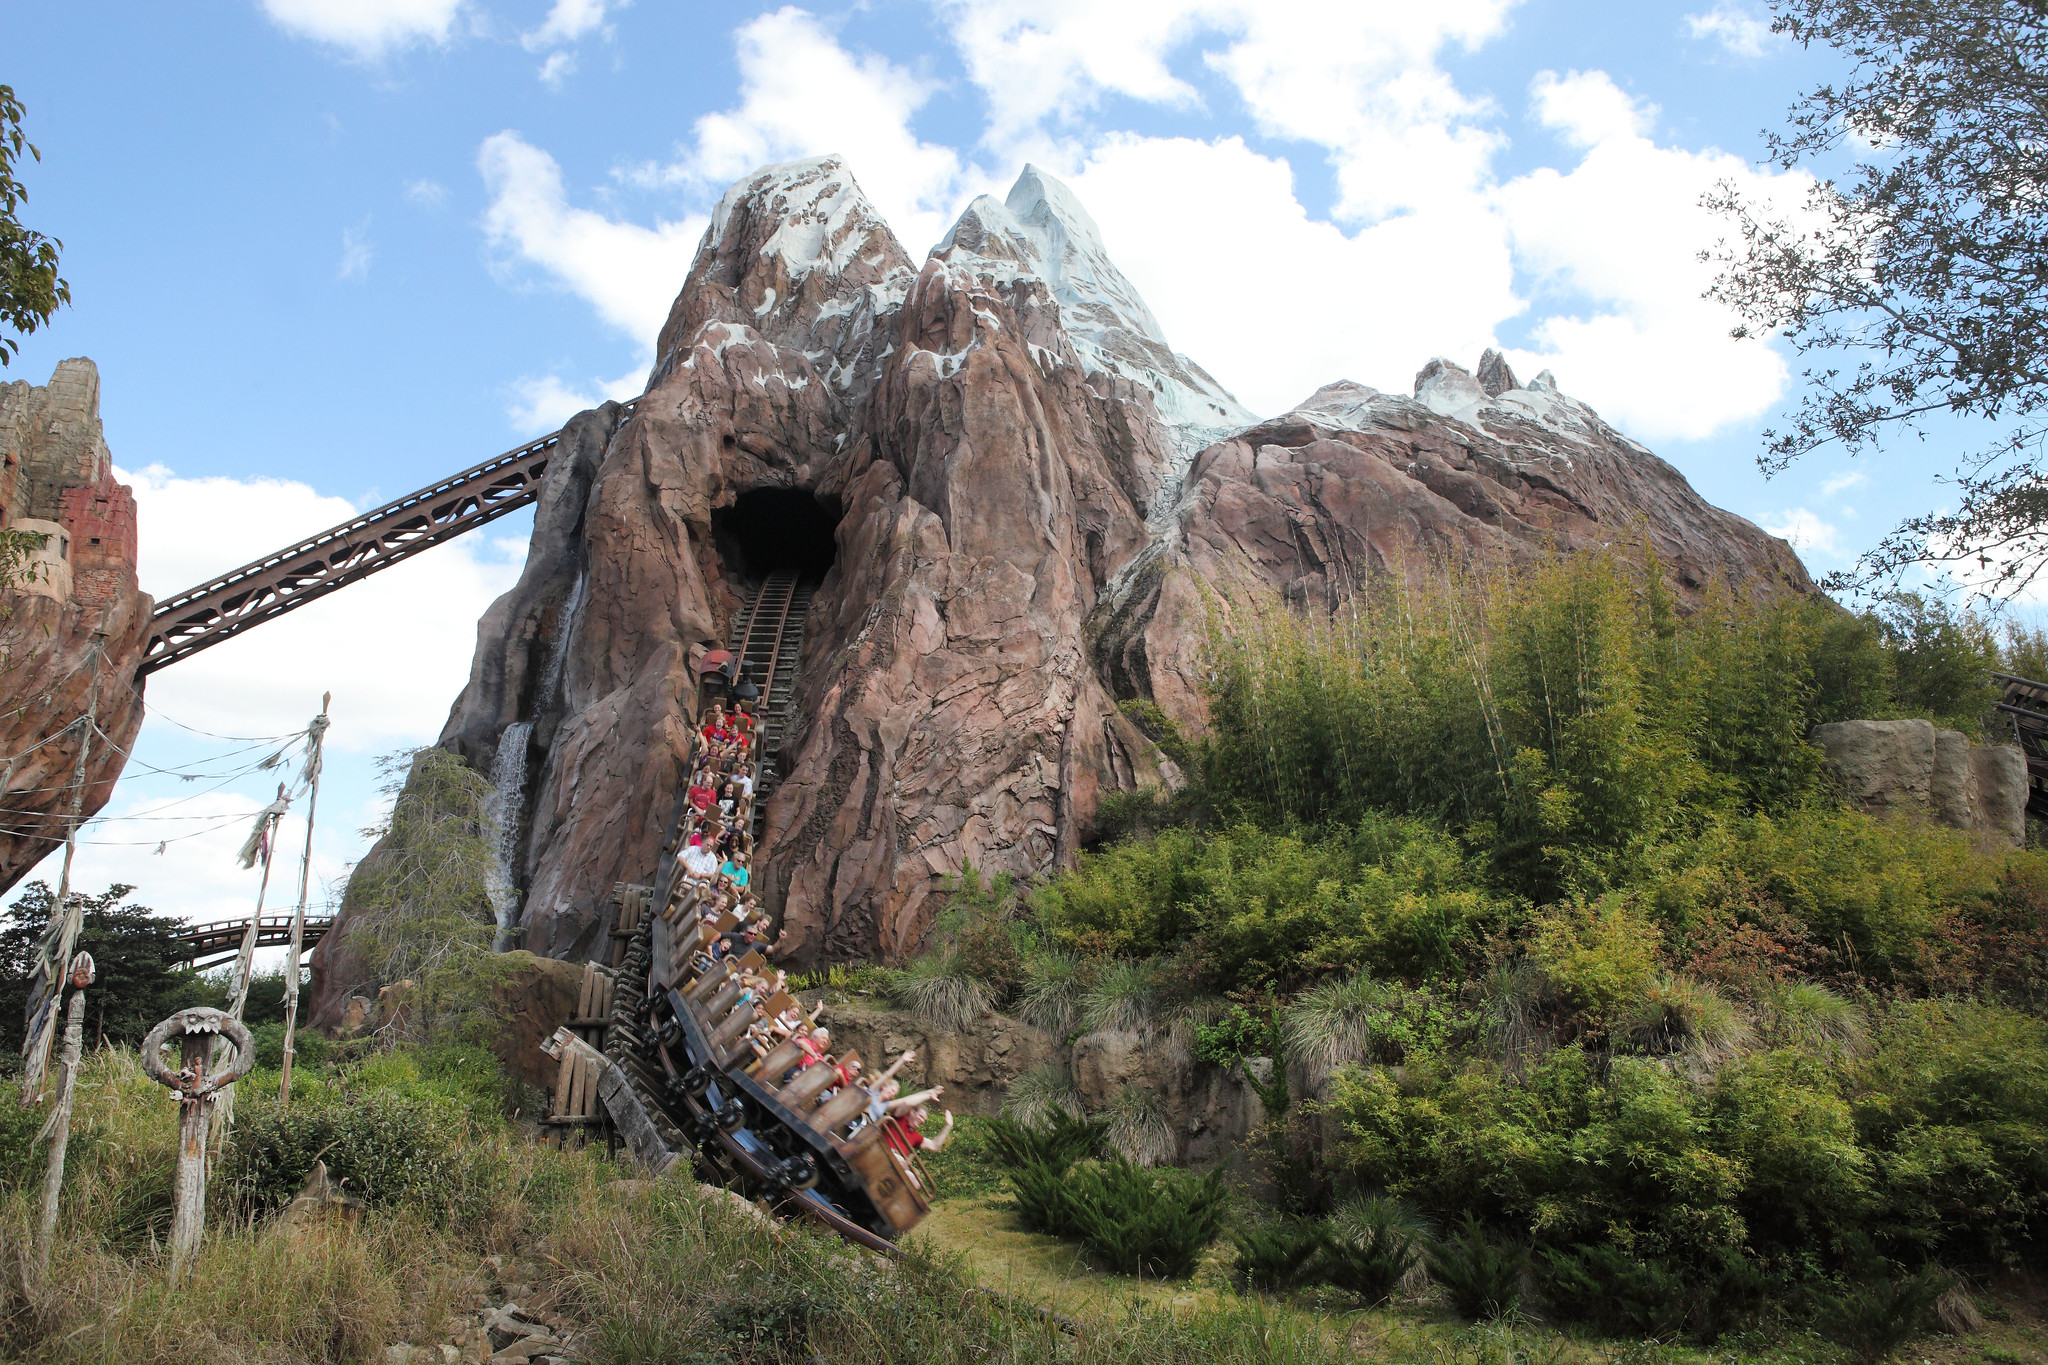 Expedition Everest from the ground